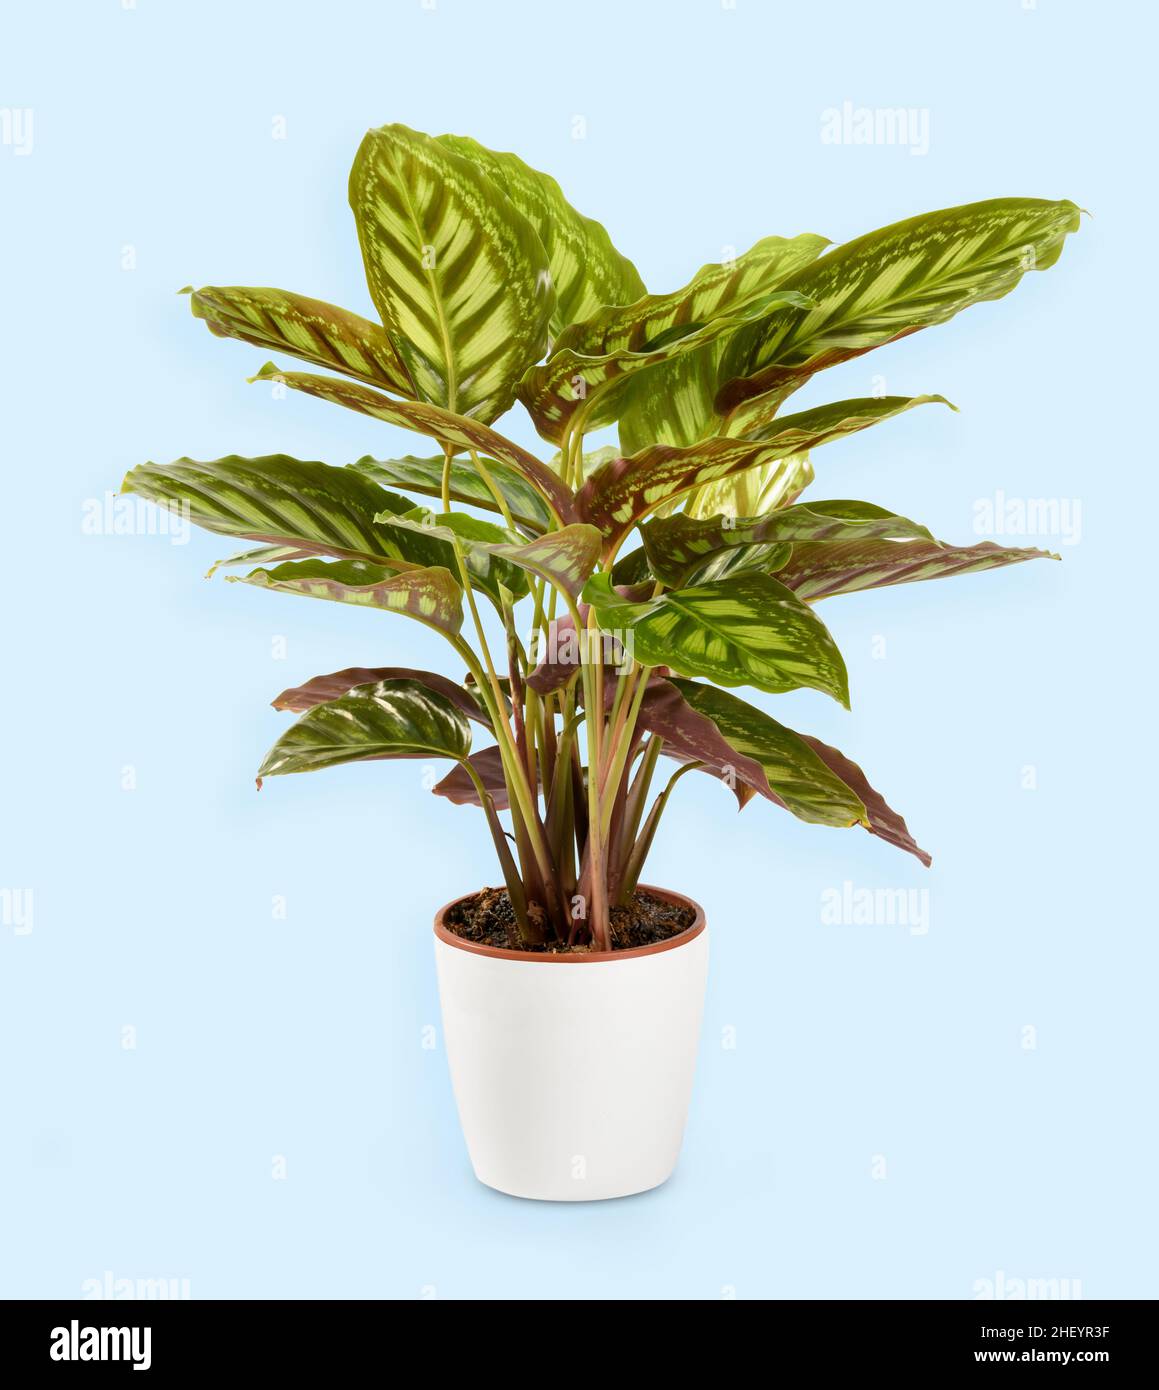 Calathea makoyana plant with light green stripes growing in pot placed on light blue background Stock Photo